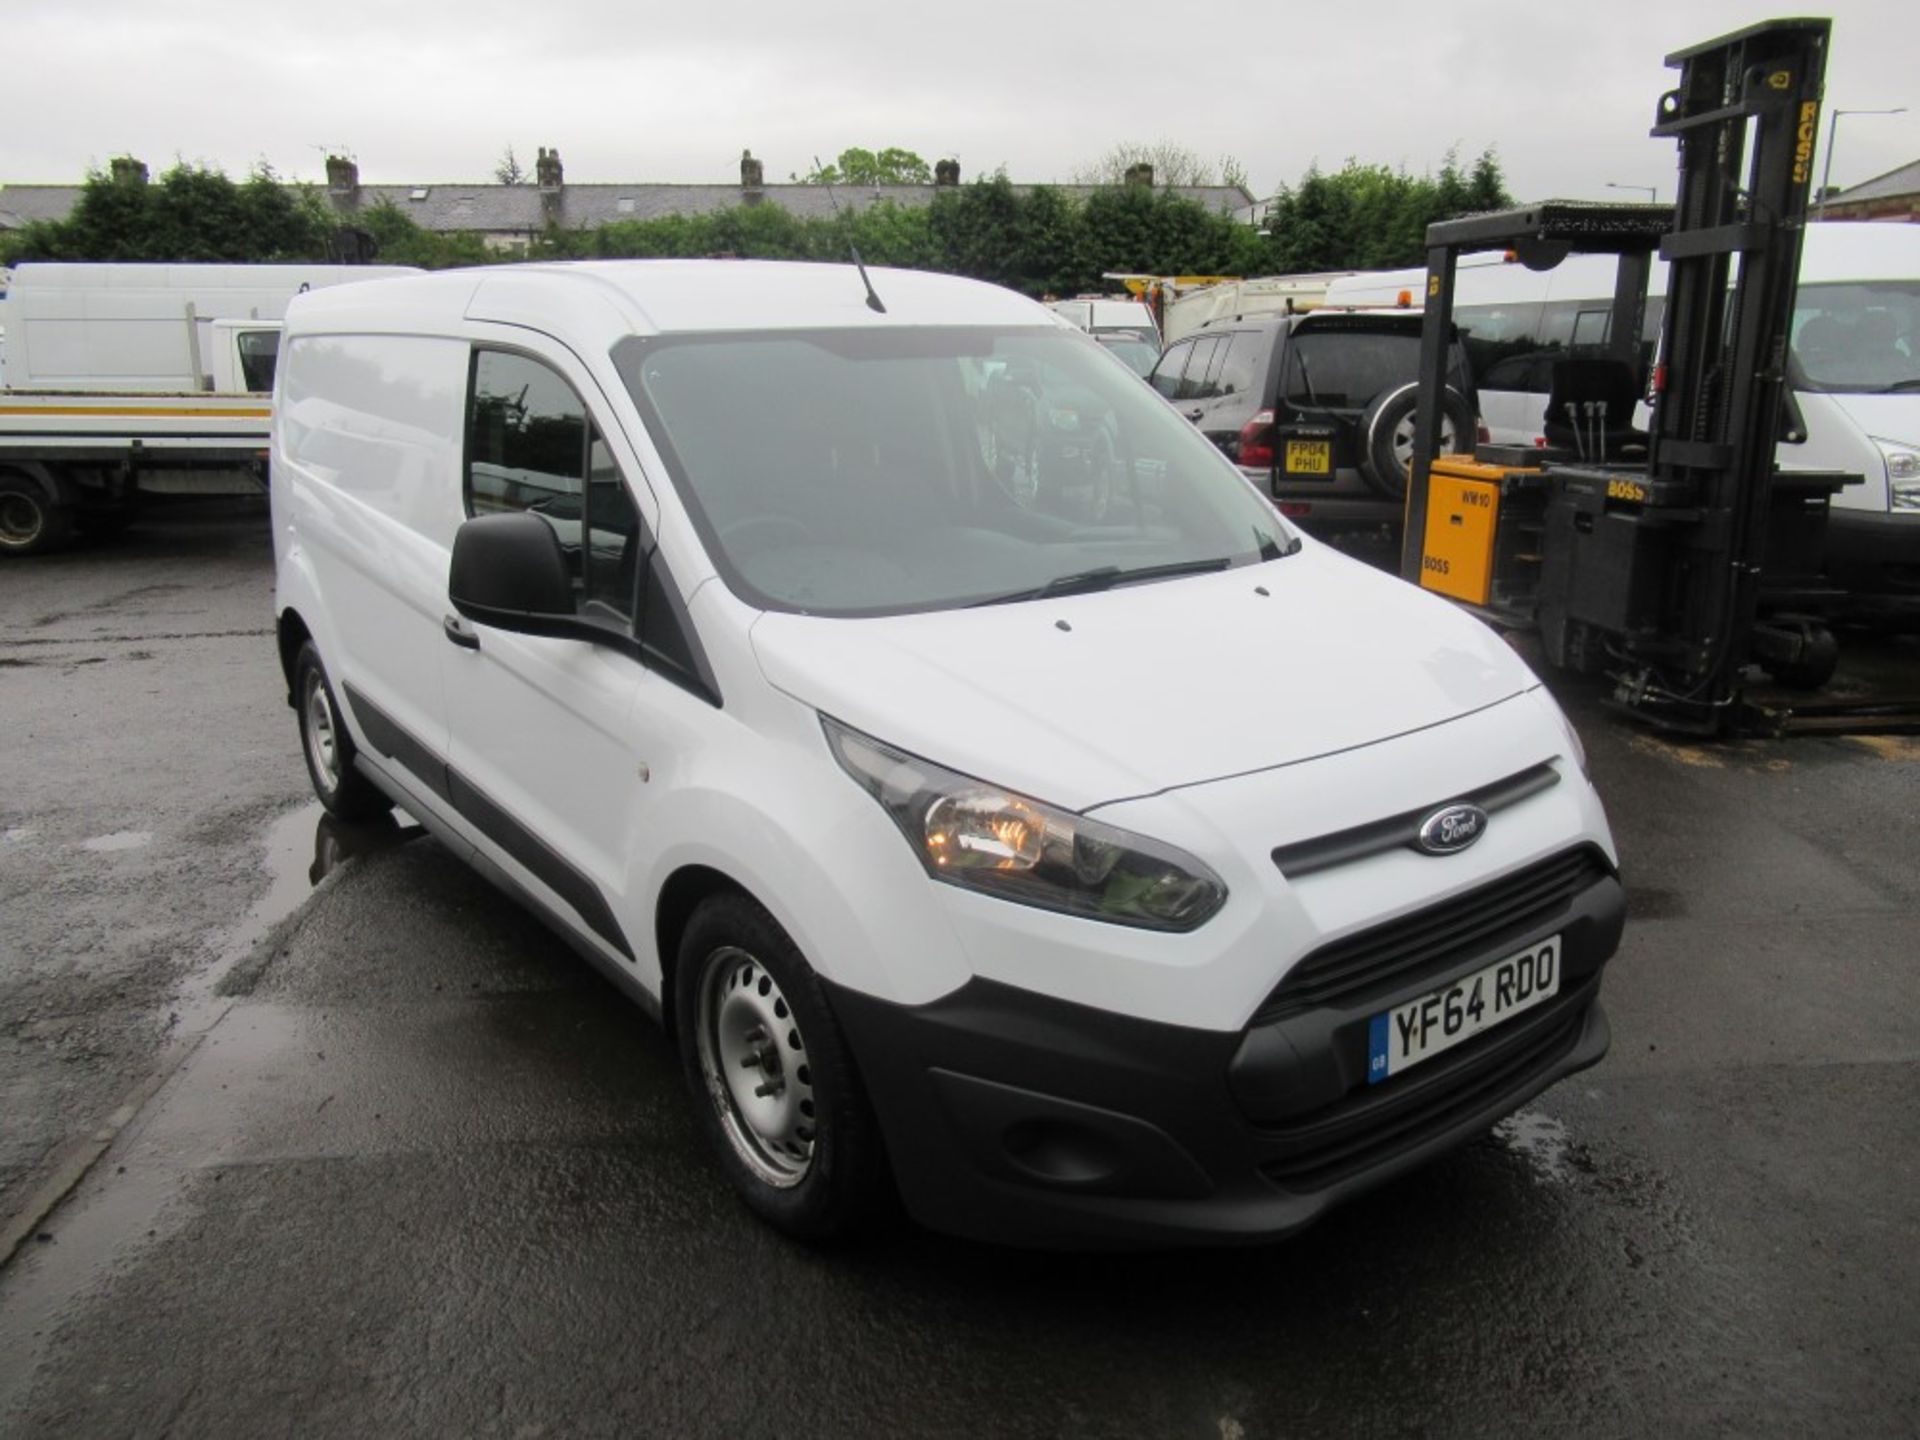 64 reg FORD TRANSIT CONNECT 210 ECO-TECH, 1ST REG 01/15, TEST 01/20, 108763M WARRANTED, V5 HERE, 1